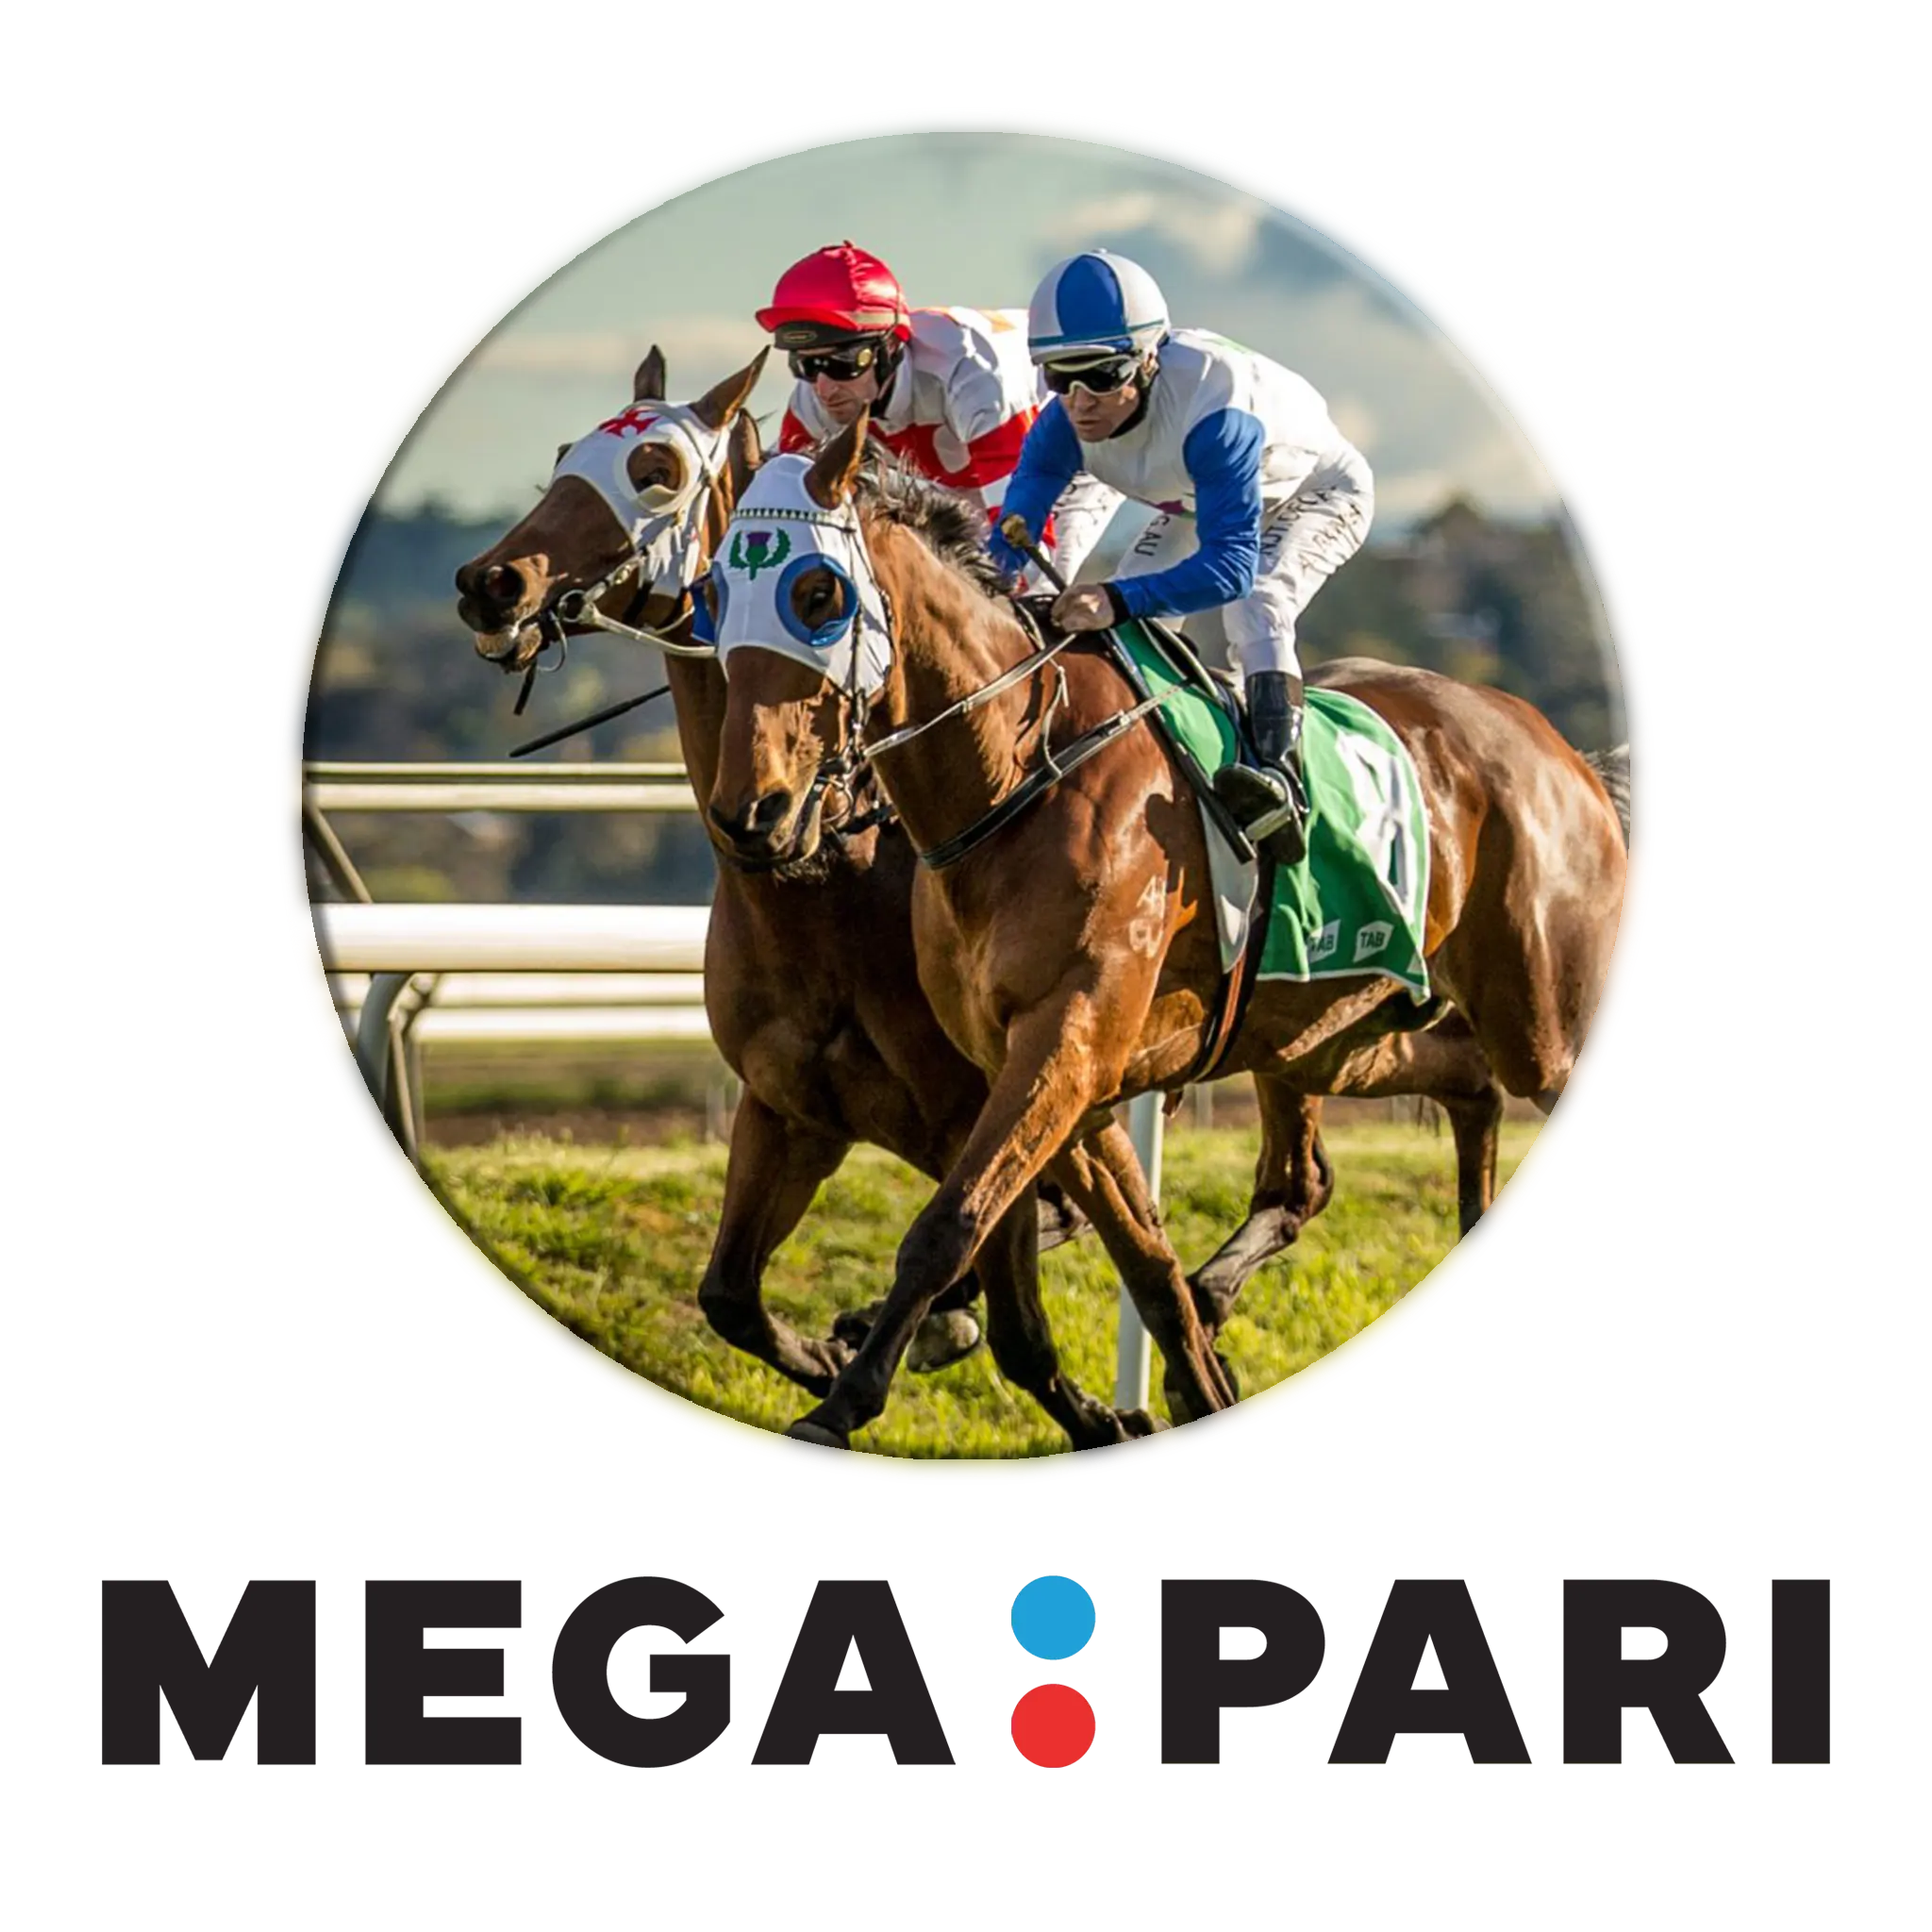 Start online horse racing betting in India with Megapari!